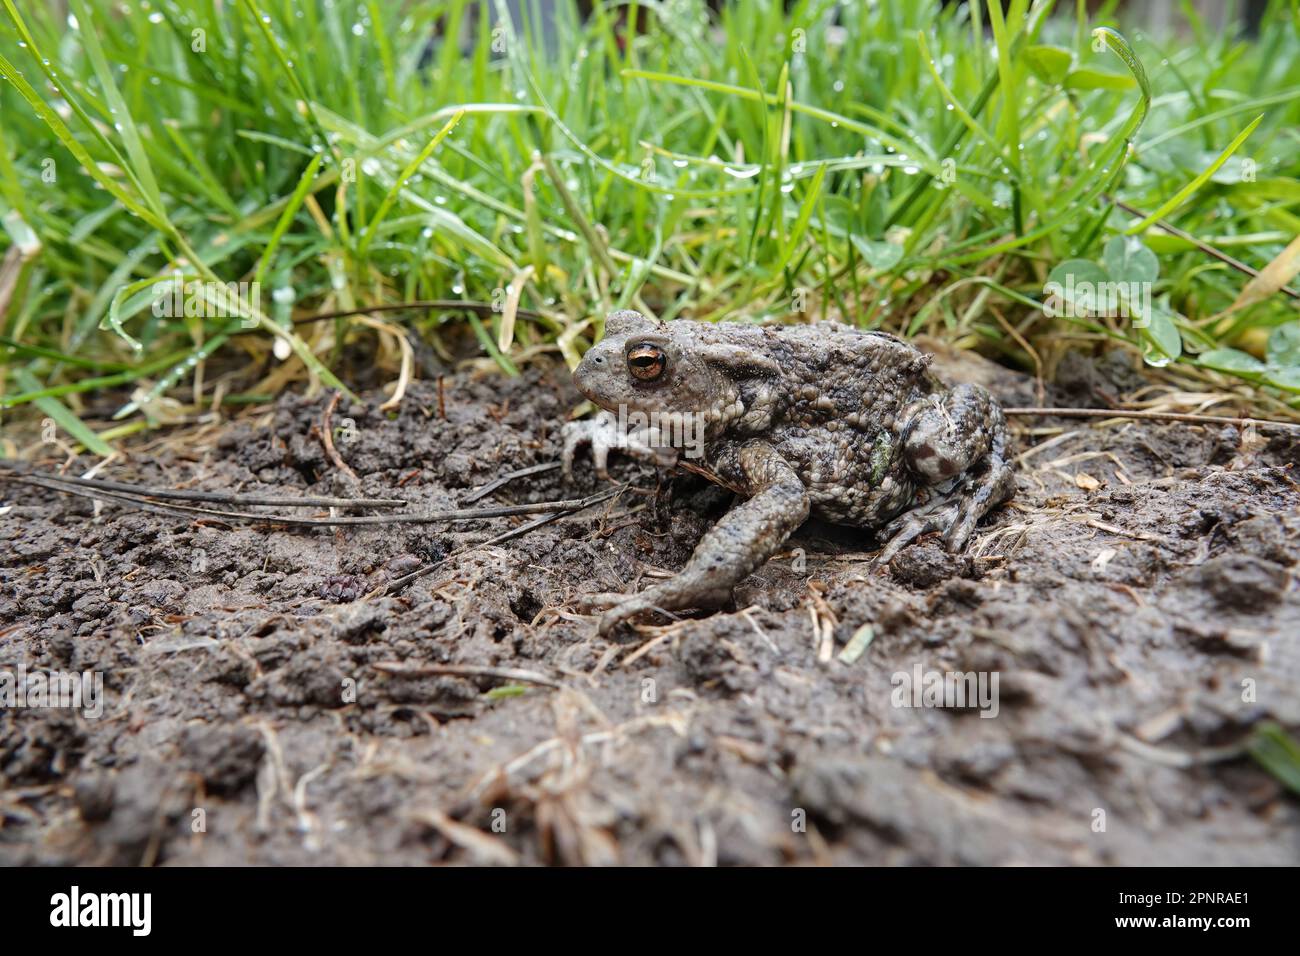 Closeup on a female European common toad, Bufo bufo sitting on the ground and grass in the garden Stock Photo